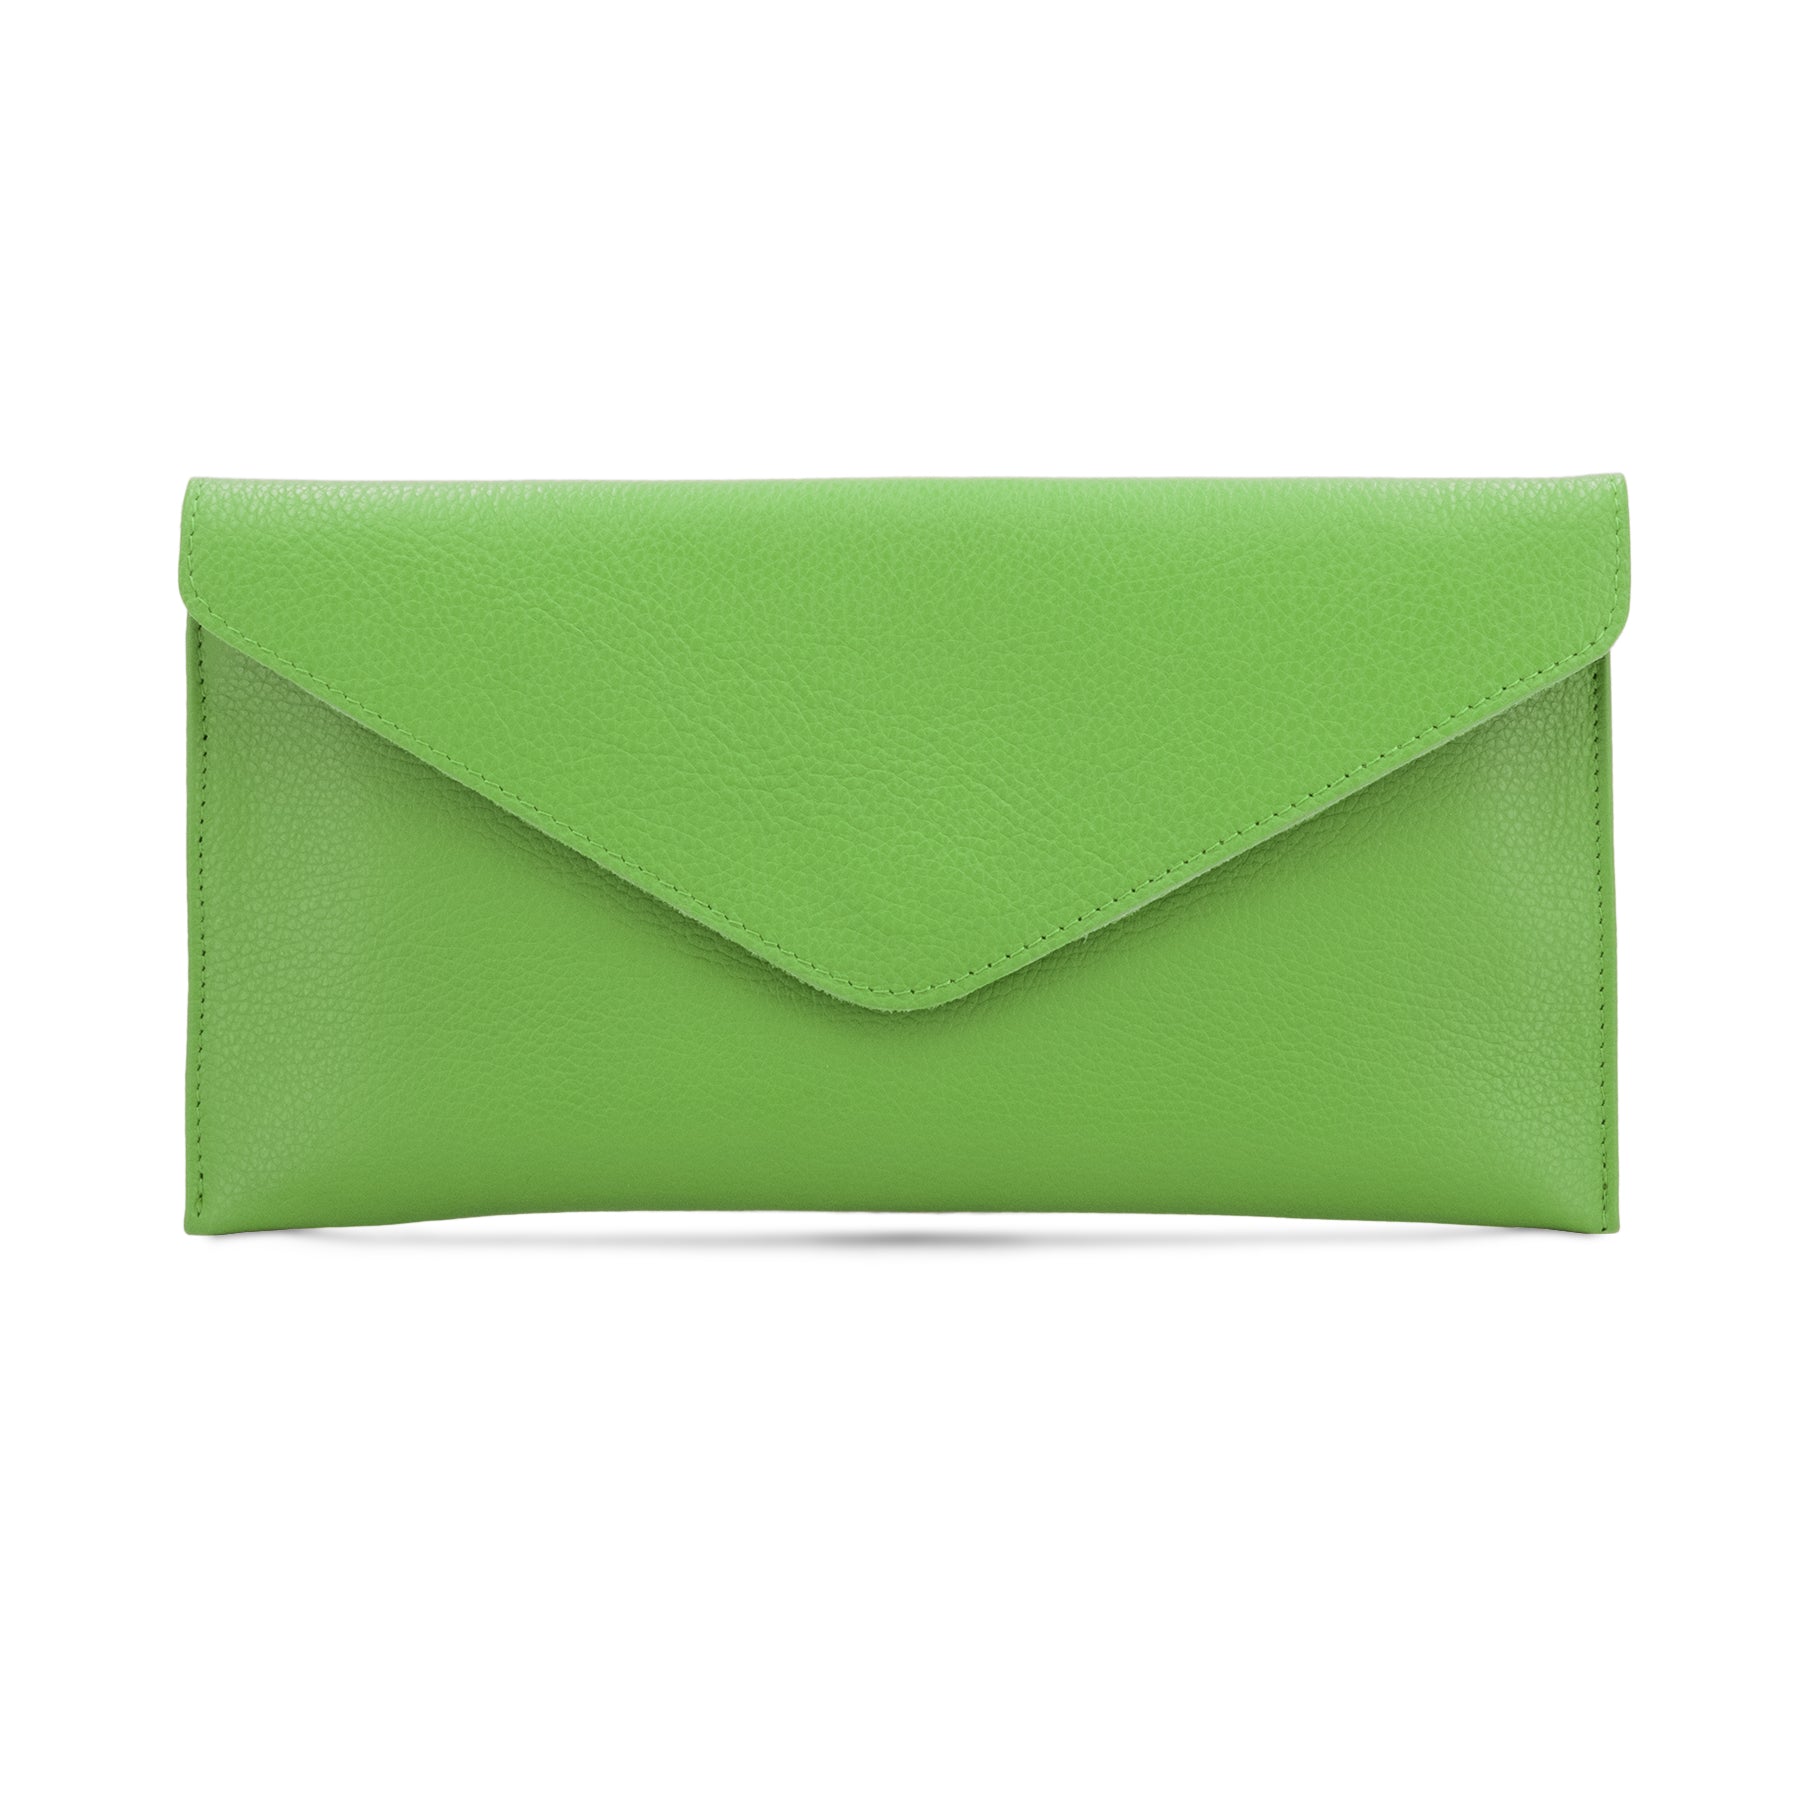 luscious scarves Lime Green Genuine Italian Leather Envelope Clutch Bag , 10 Colours Available